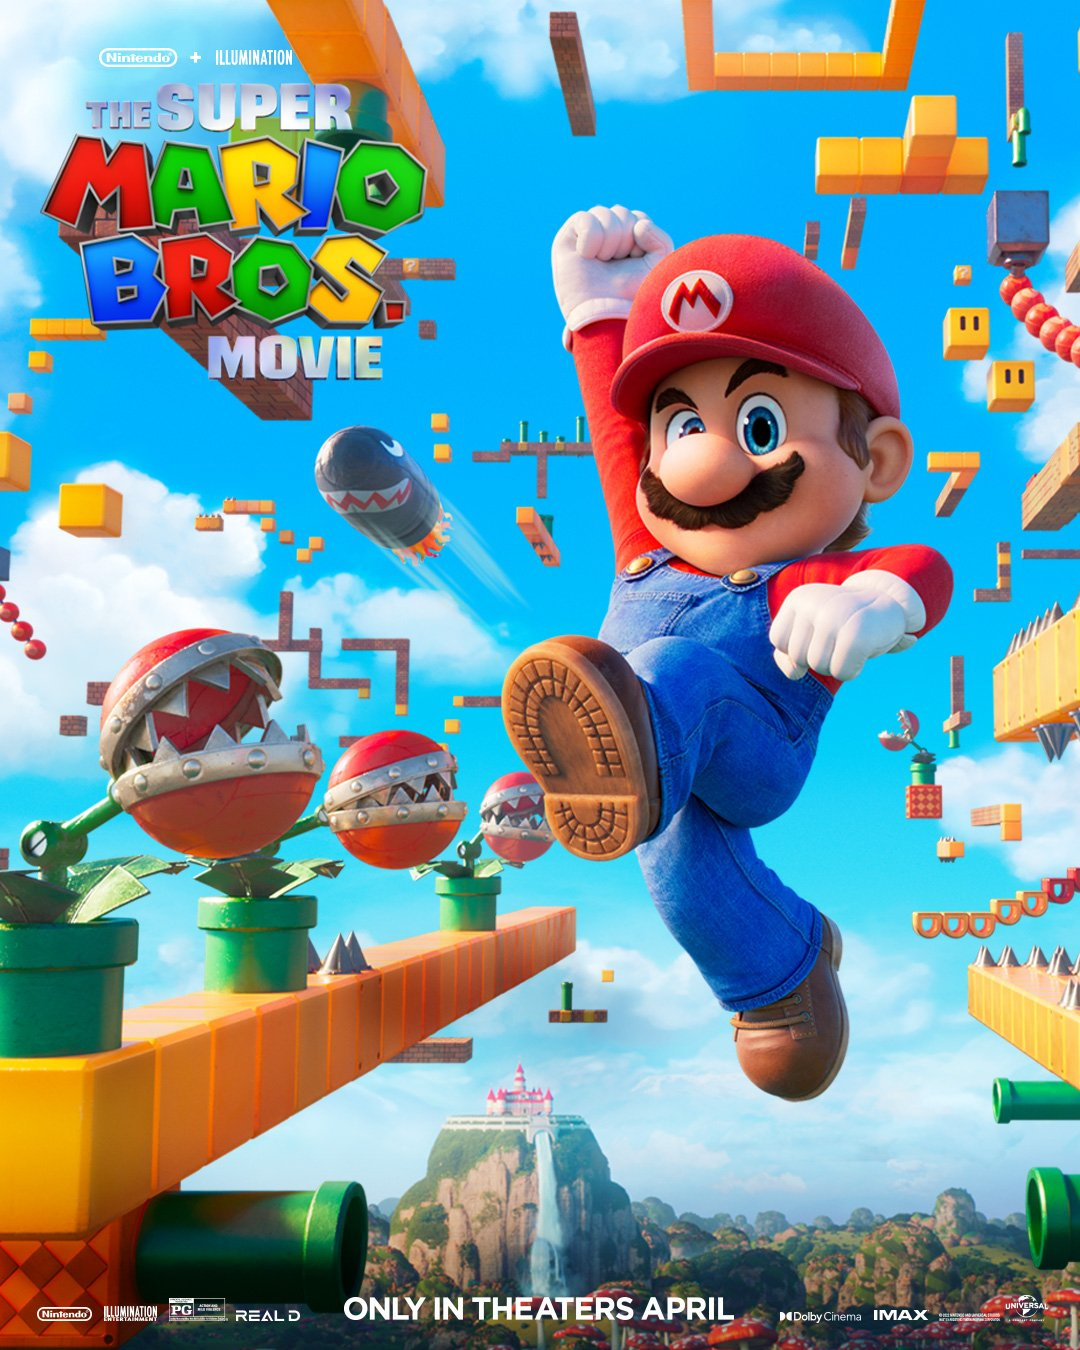 New Posters Revealed For The Super Mario Bros. Movie, Take A Look |  Nintendo Life